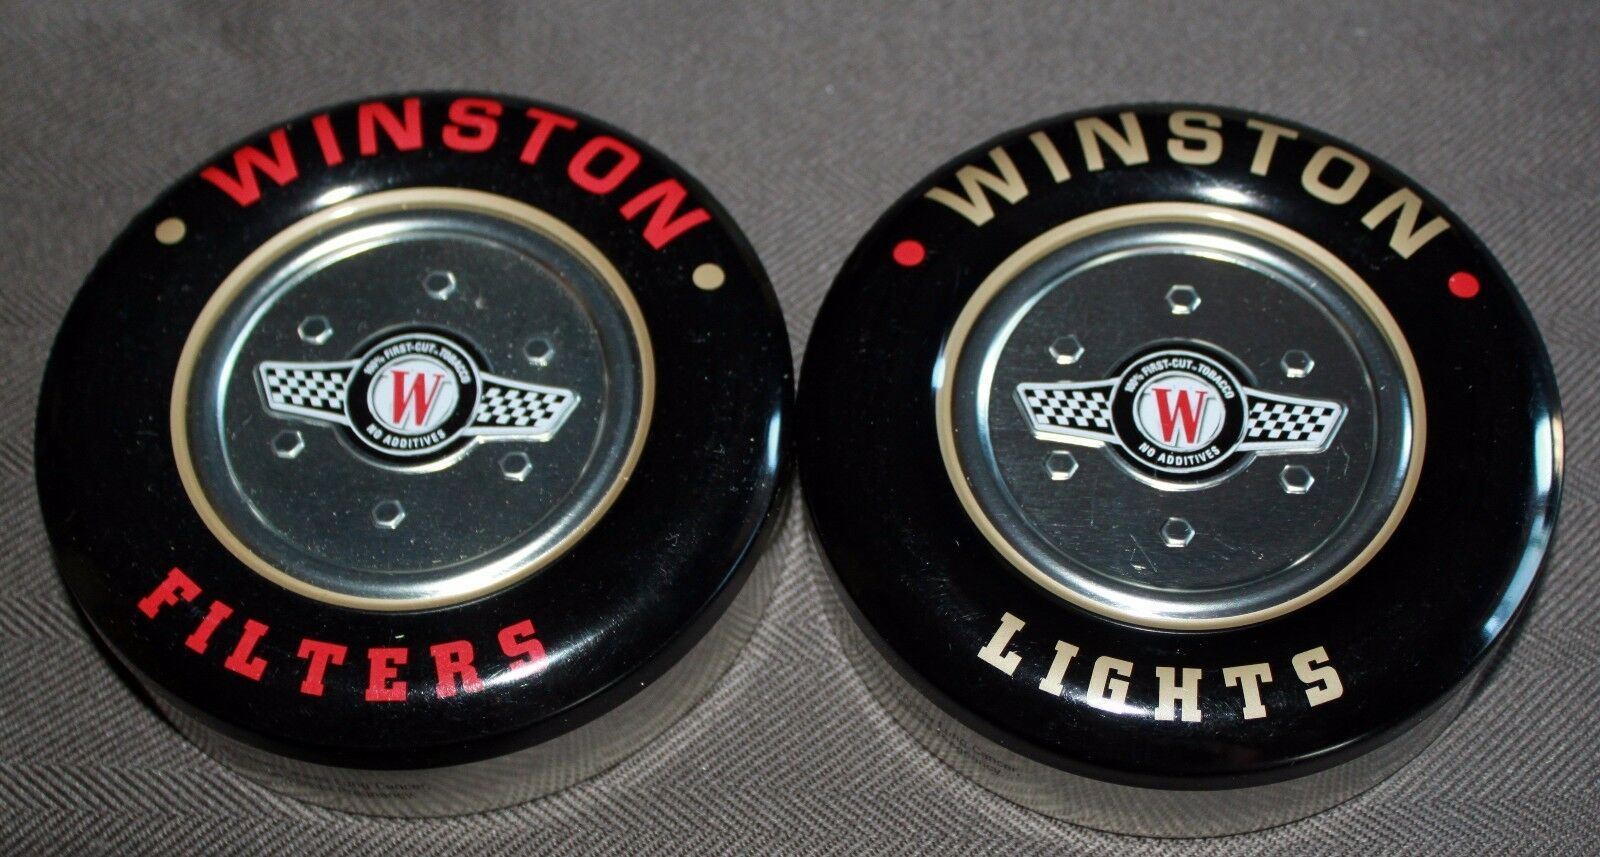 (2) Collectible Winston Cup "Tire" Cigarette Tins - Winston Filters - Lights - $7.91